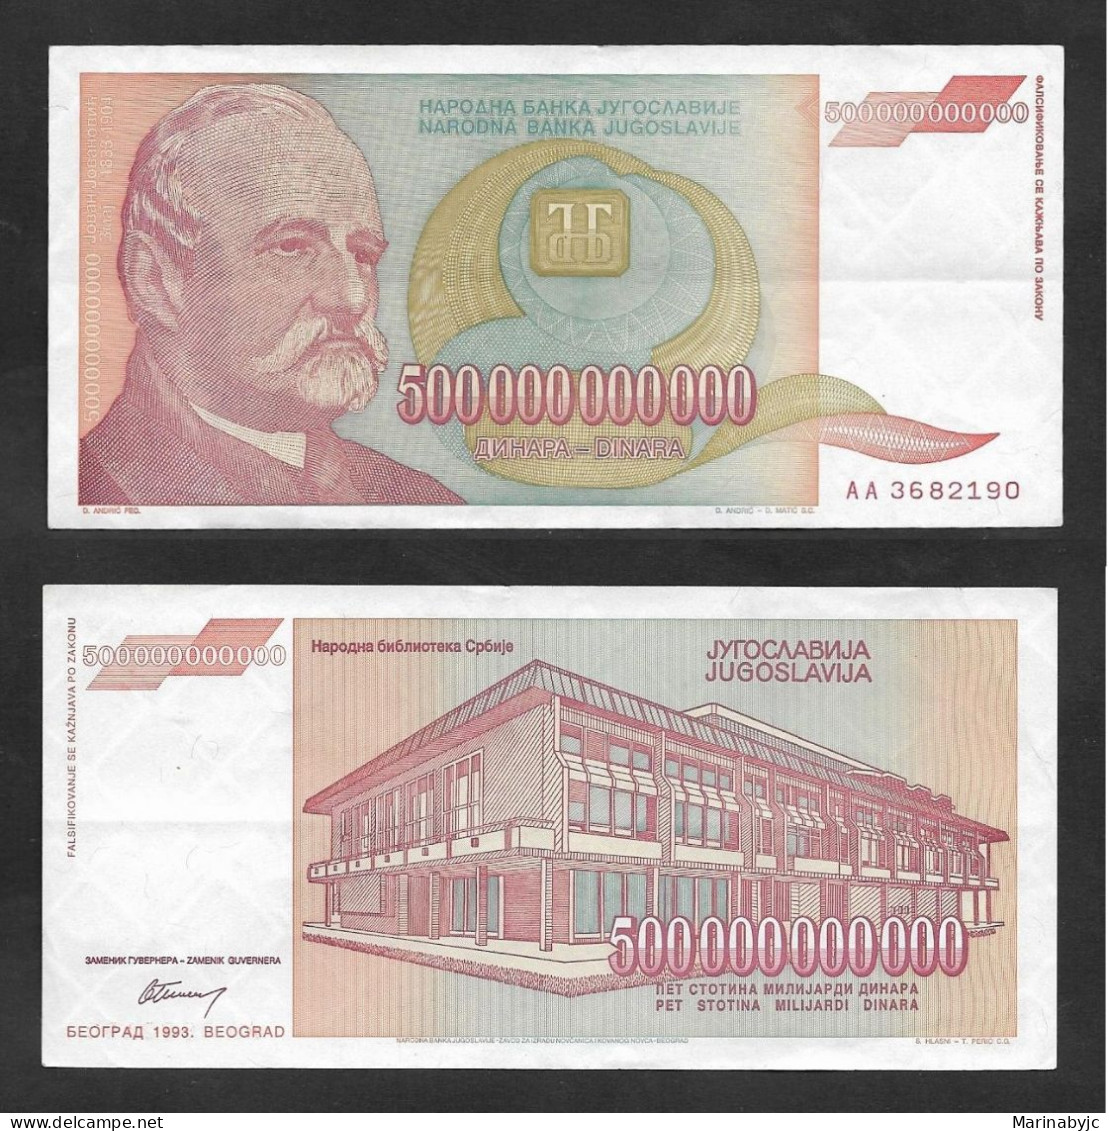 SE)1993 YUGOSLAVIA, BANKNOTE OF 500,000,000,000 DINARS OF THE CENTRAL BANK OF YUGOSLAVIA, WITH REVERSE, VF - Oblitérés